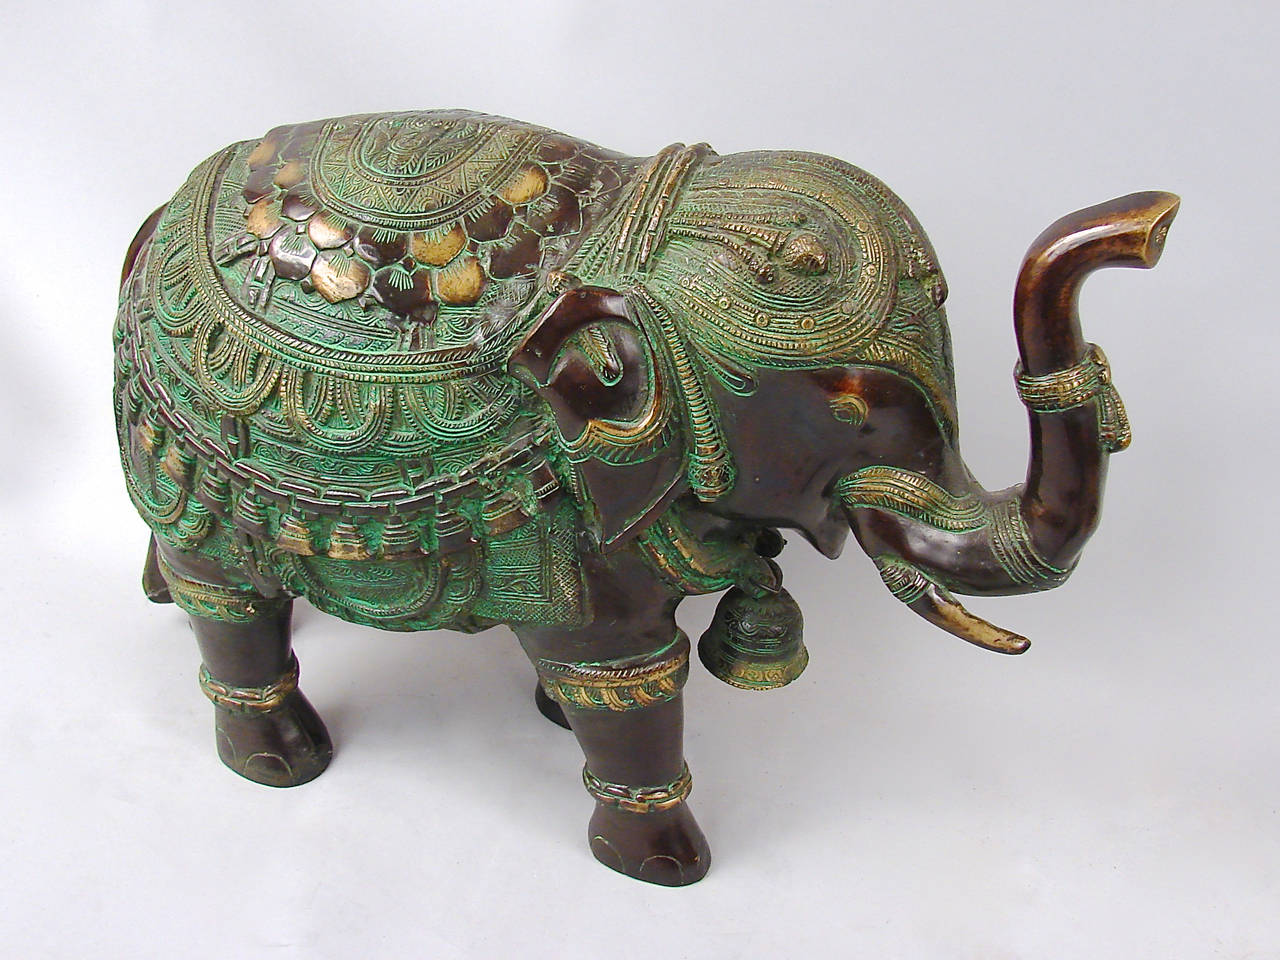 A decorative and pleasing pair of Indian cast bronze elephants, each with a bell around her neck, their trunks in the raised position, 20th century.